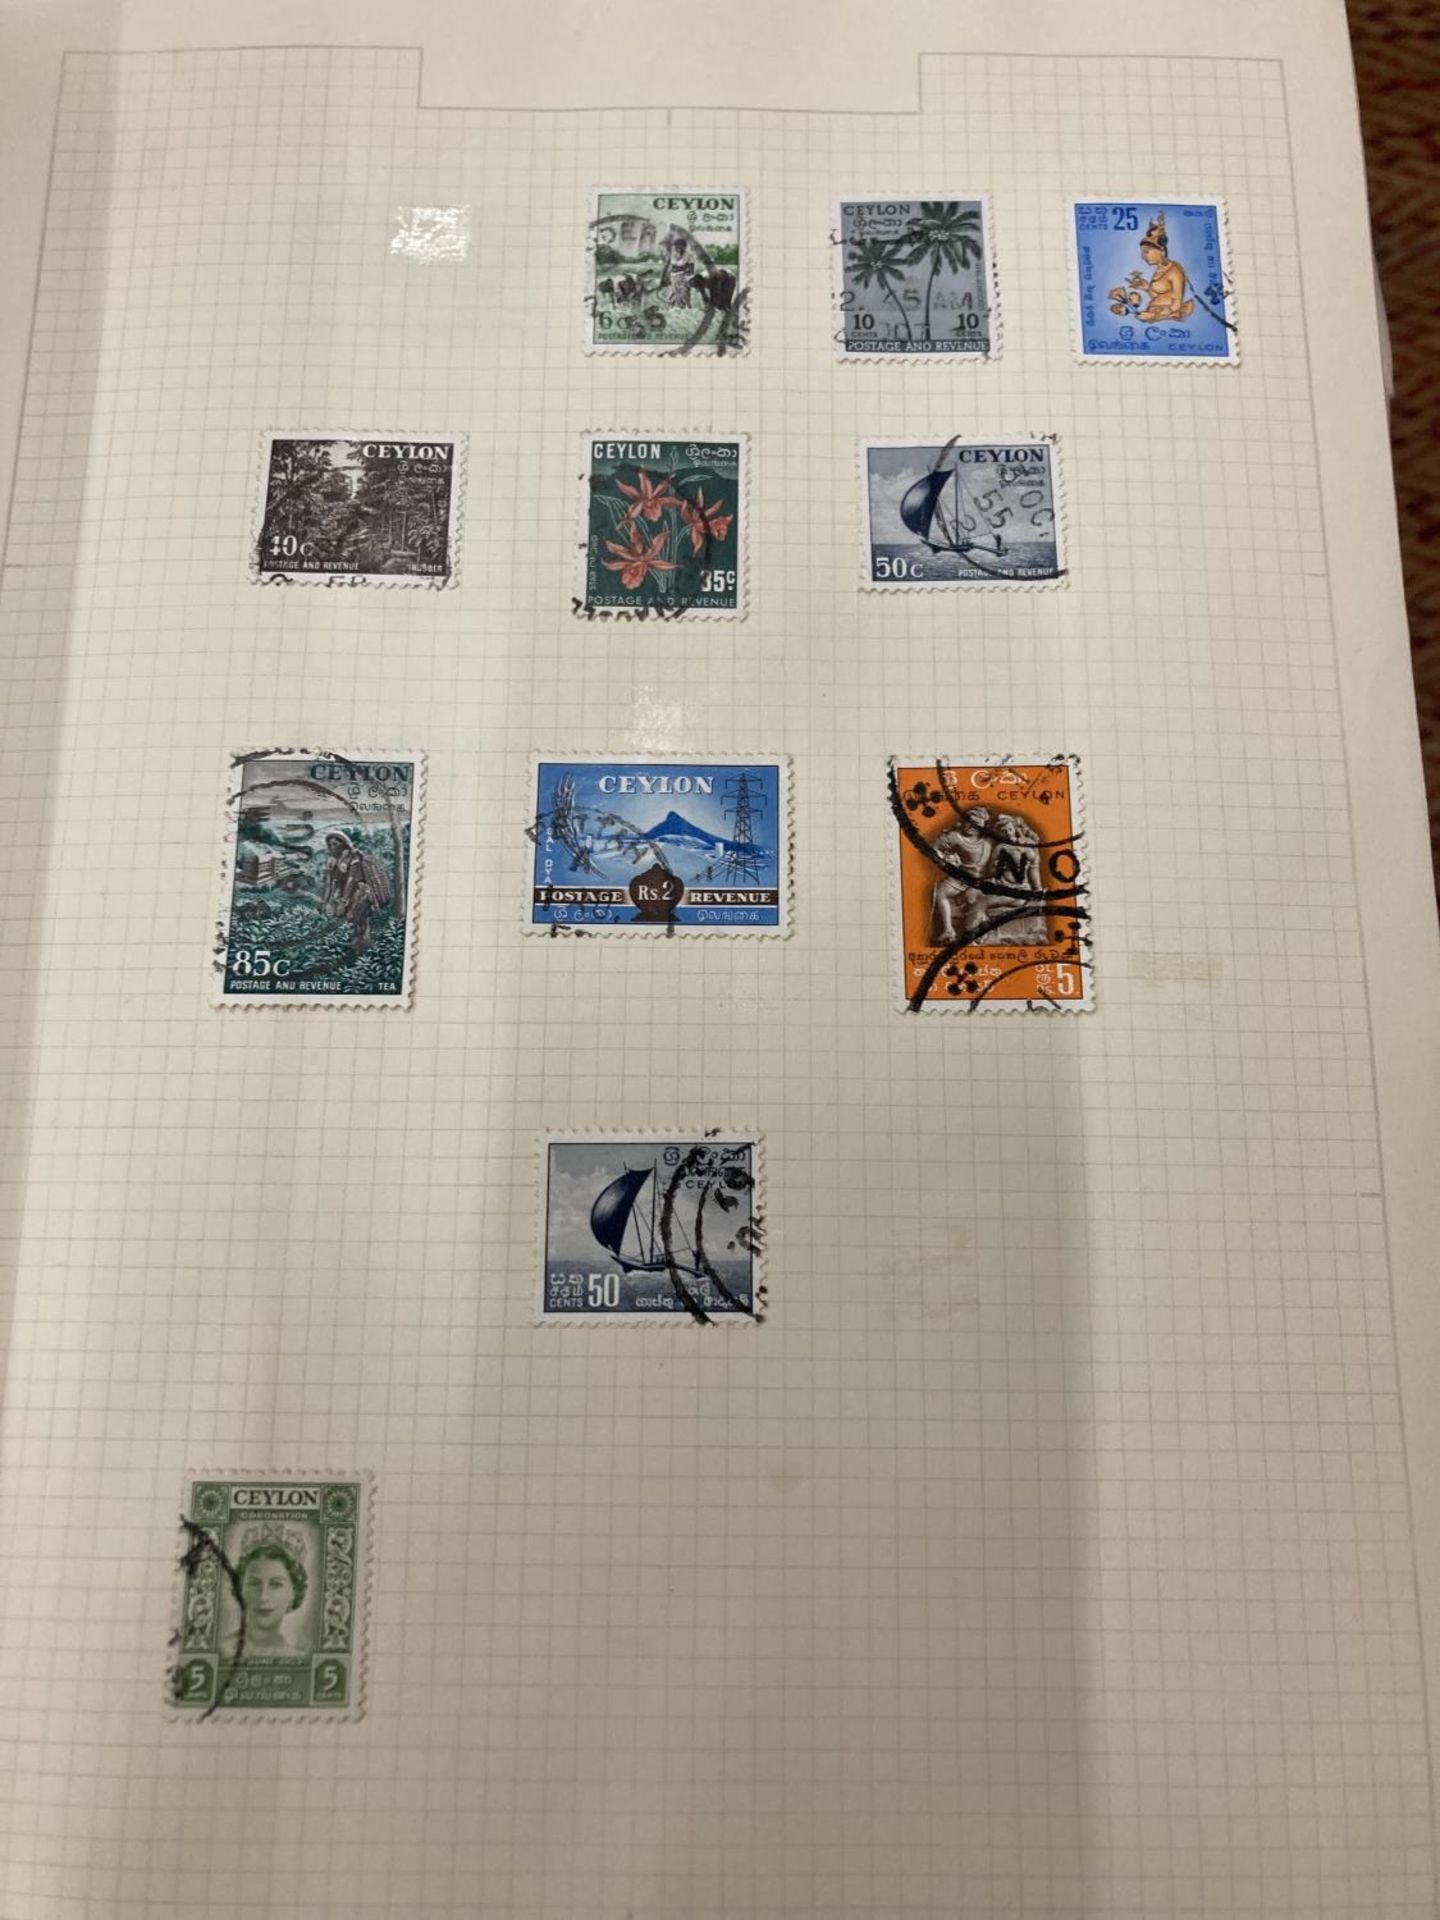 A COLLECTION OF BRITISH COMMONWEALTH STAMPS IN TWO VOLUMES FROM CANADA TO ZANZIBAR - Image 2 of 5